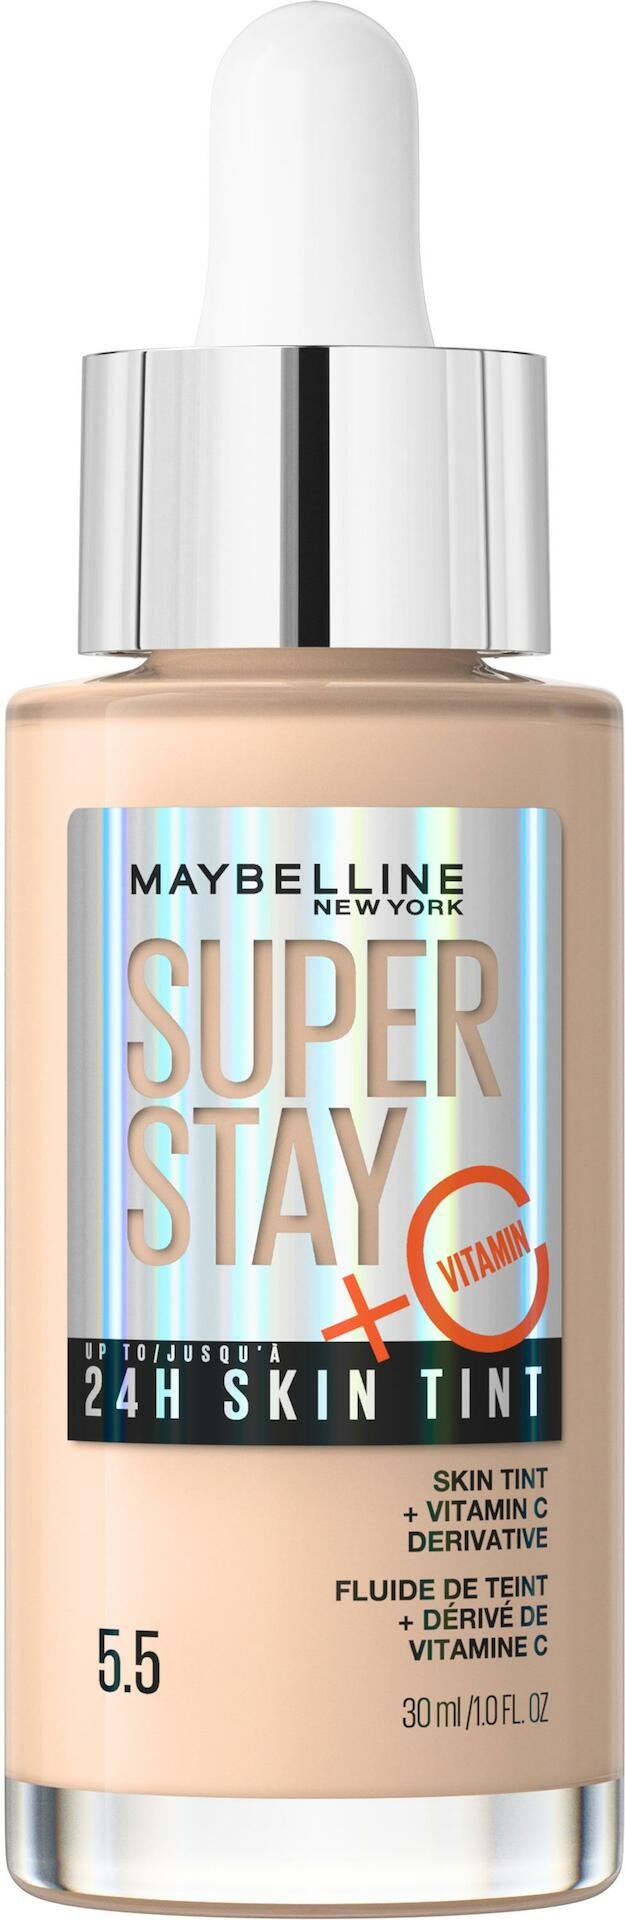 Maybelline New York Superstay 24H Skin Tint Foundation 05.5